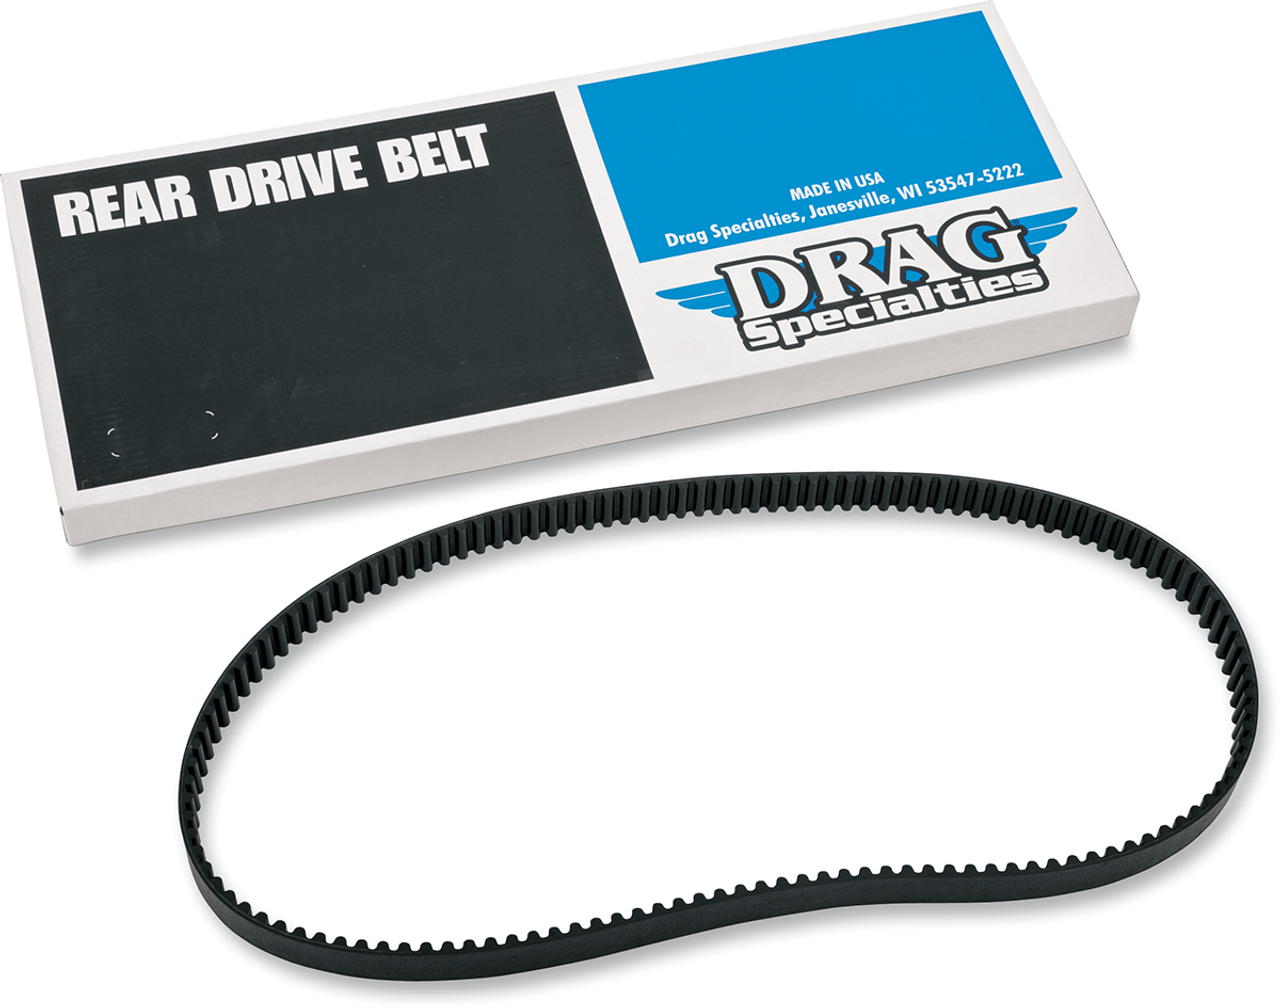 Rear Drive Belt - 139-Tooth - 1 1/8"